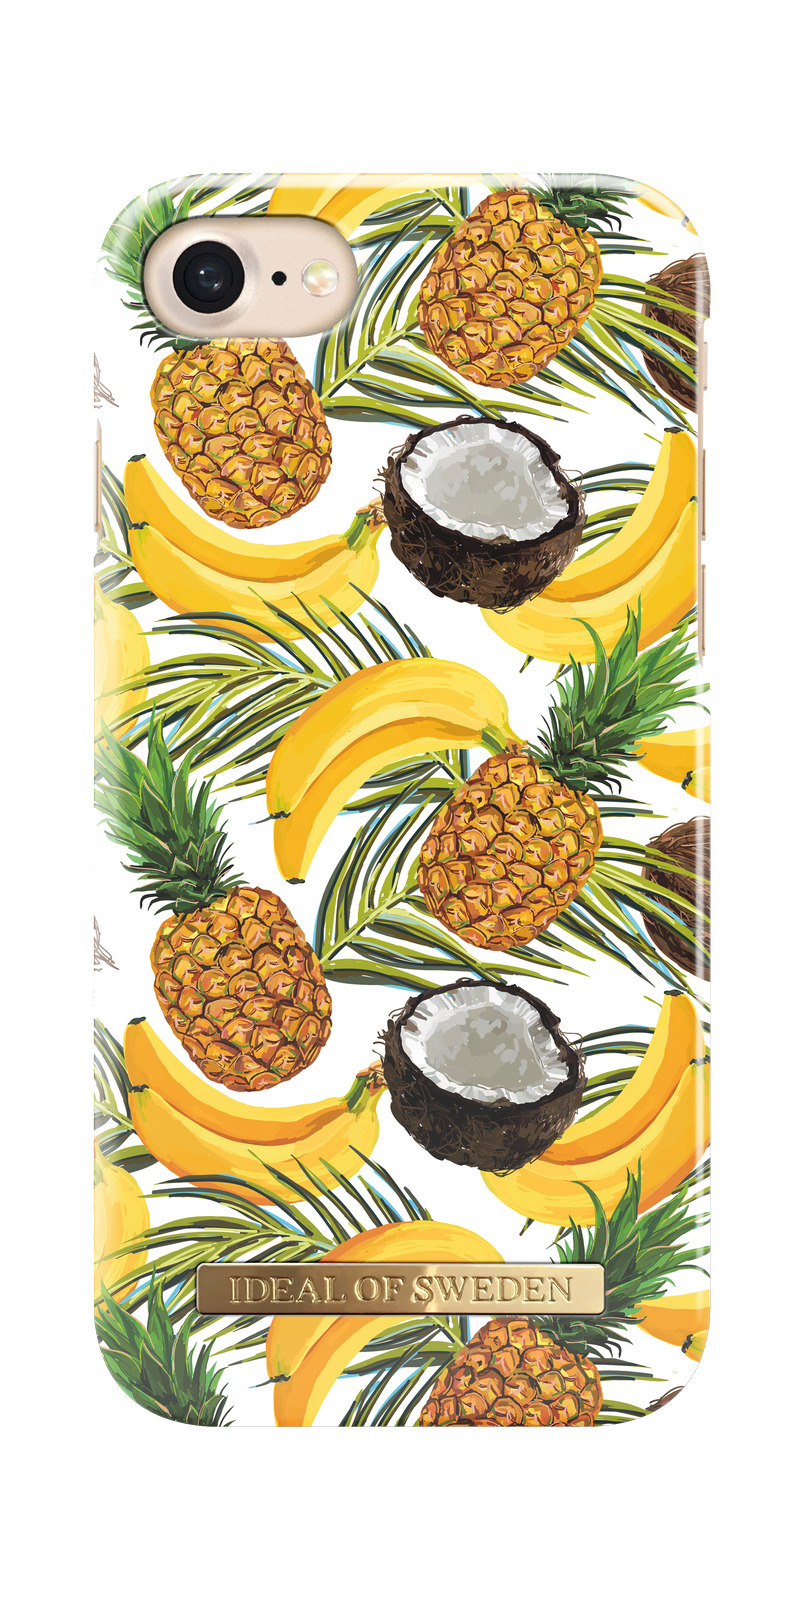 IDEAL 6, Backcover, iPhone Coconut Banana iPhone 8, Fashion, Apple, SWEDEN iPhone 7, OF